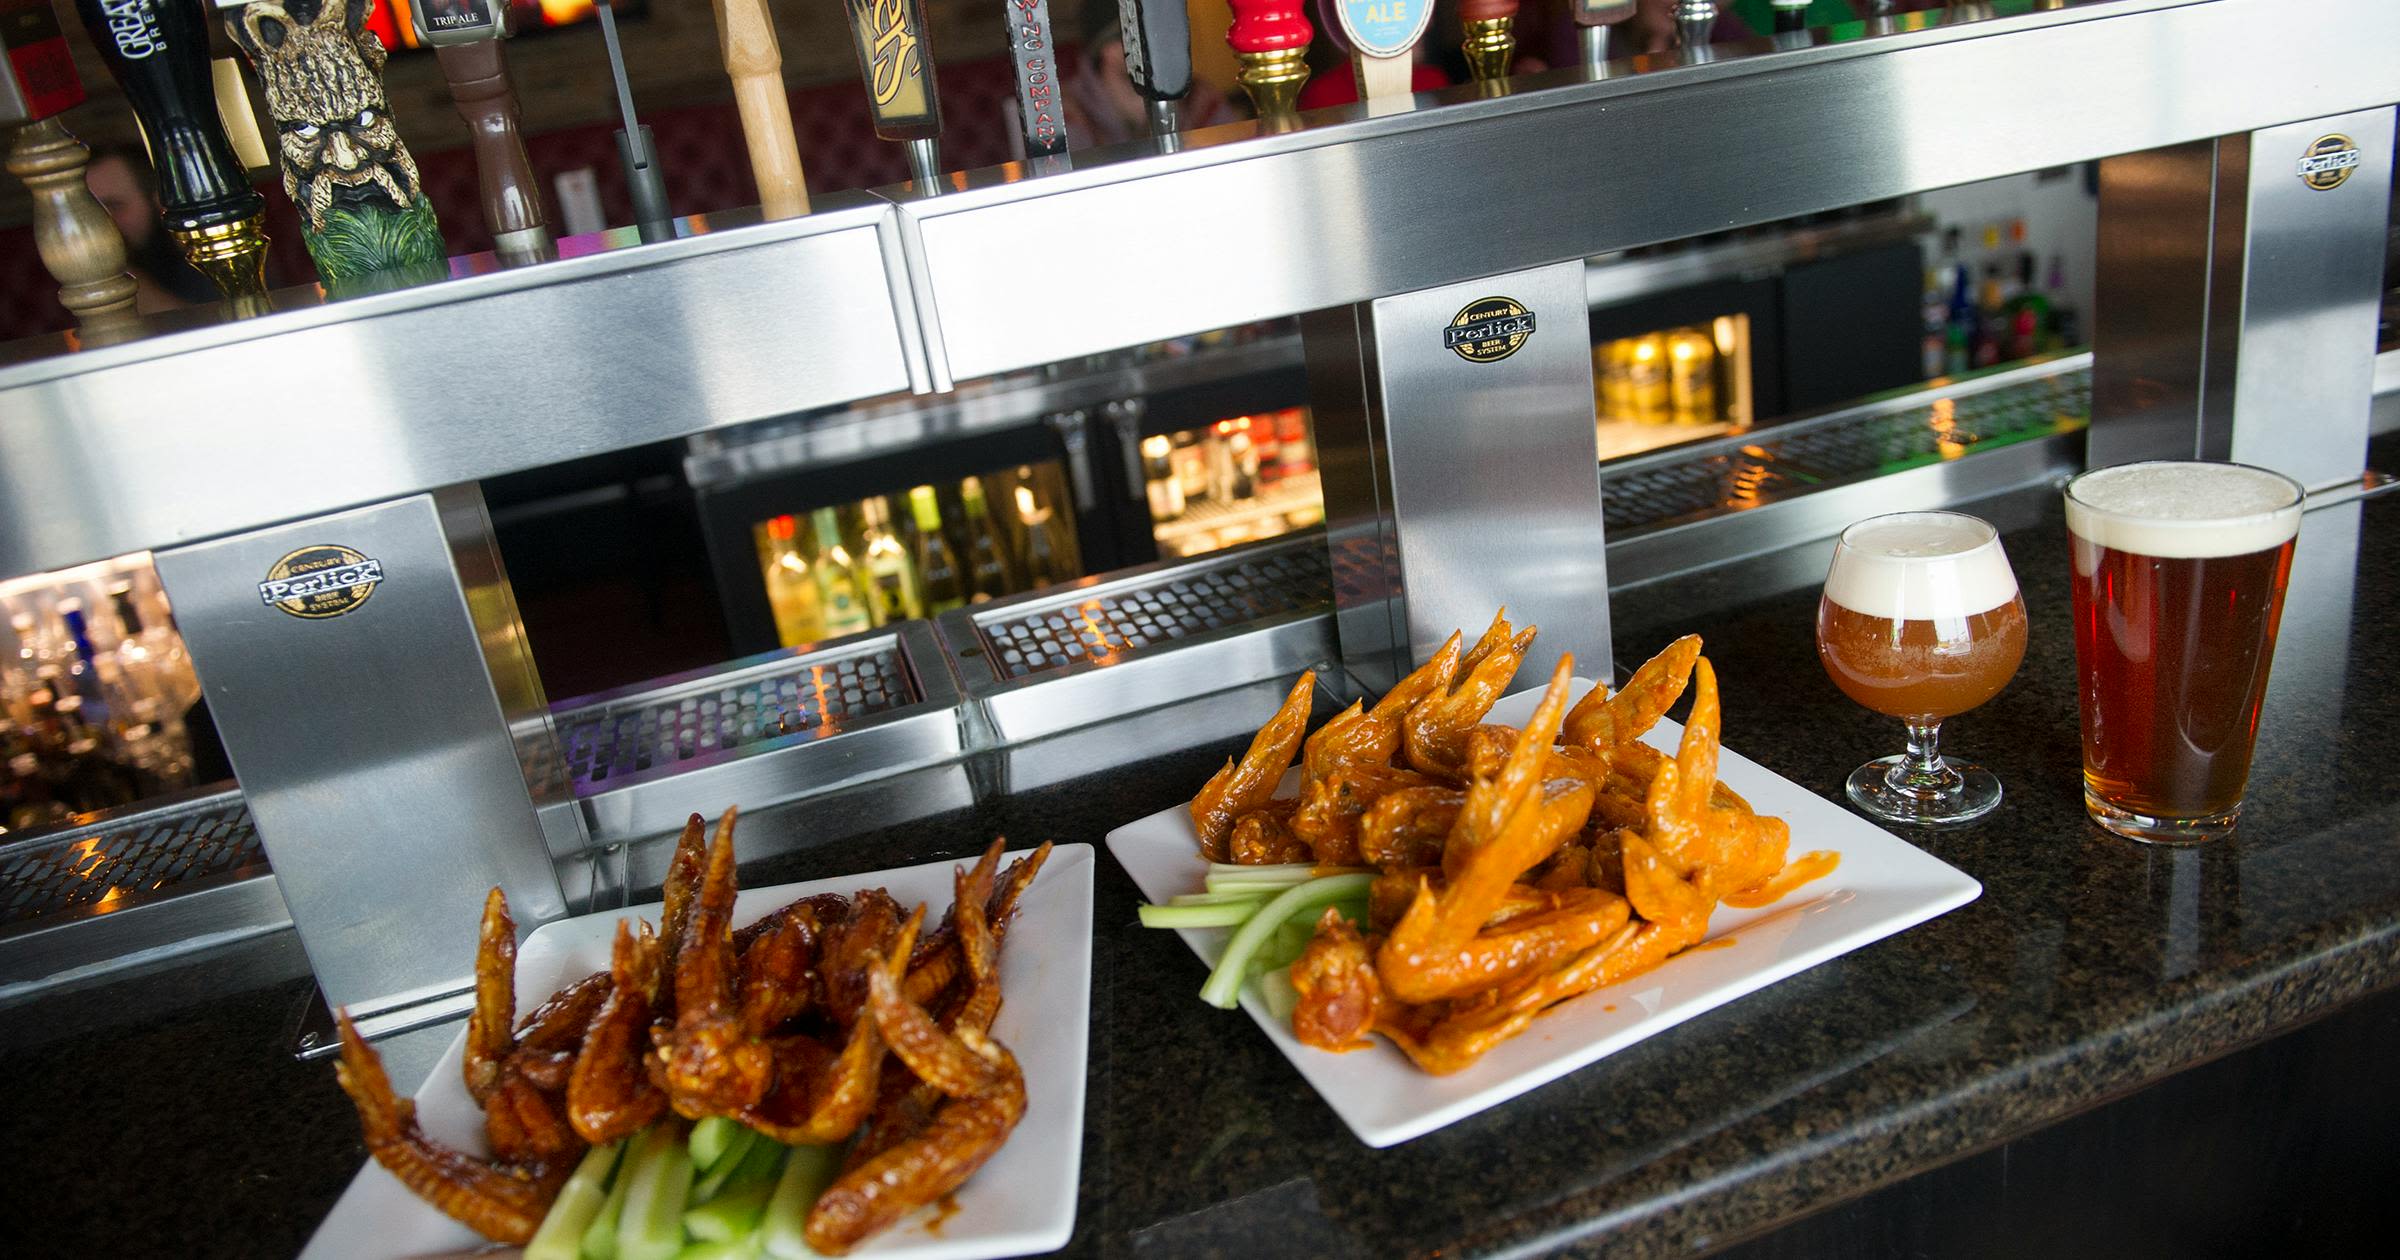 Ray J’s bringing its famous wings to Rogers